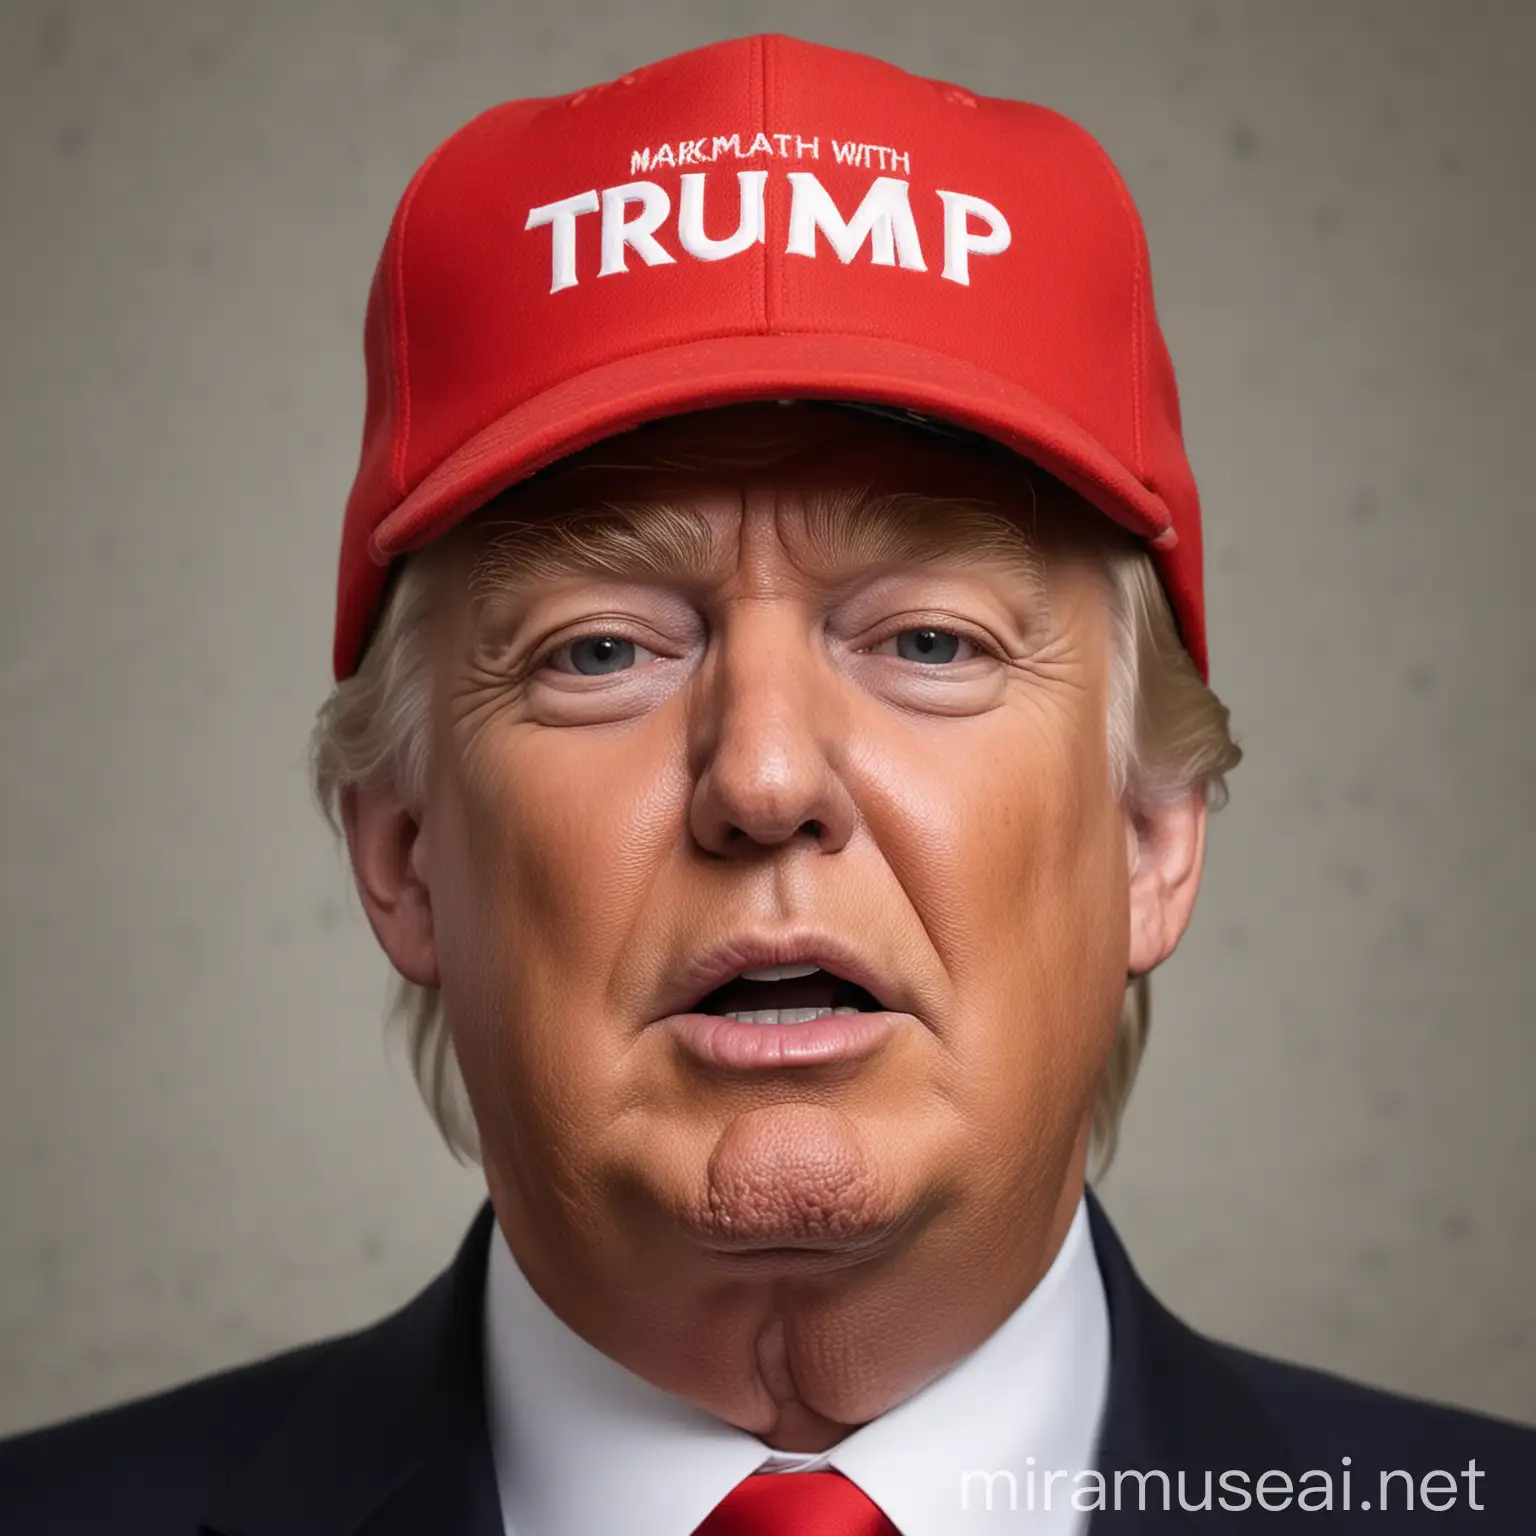 Donald Trump Wearing Red Cap Emblematic of His Campaign